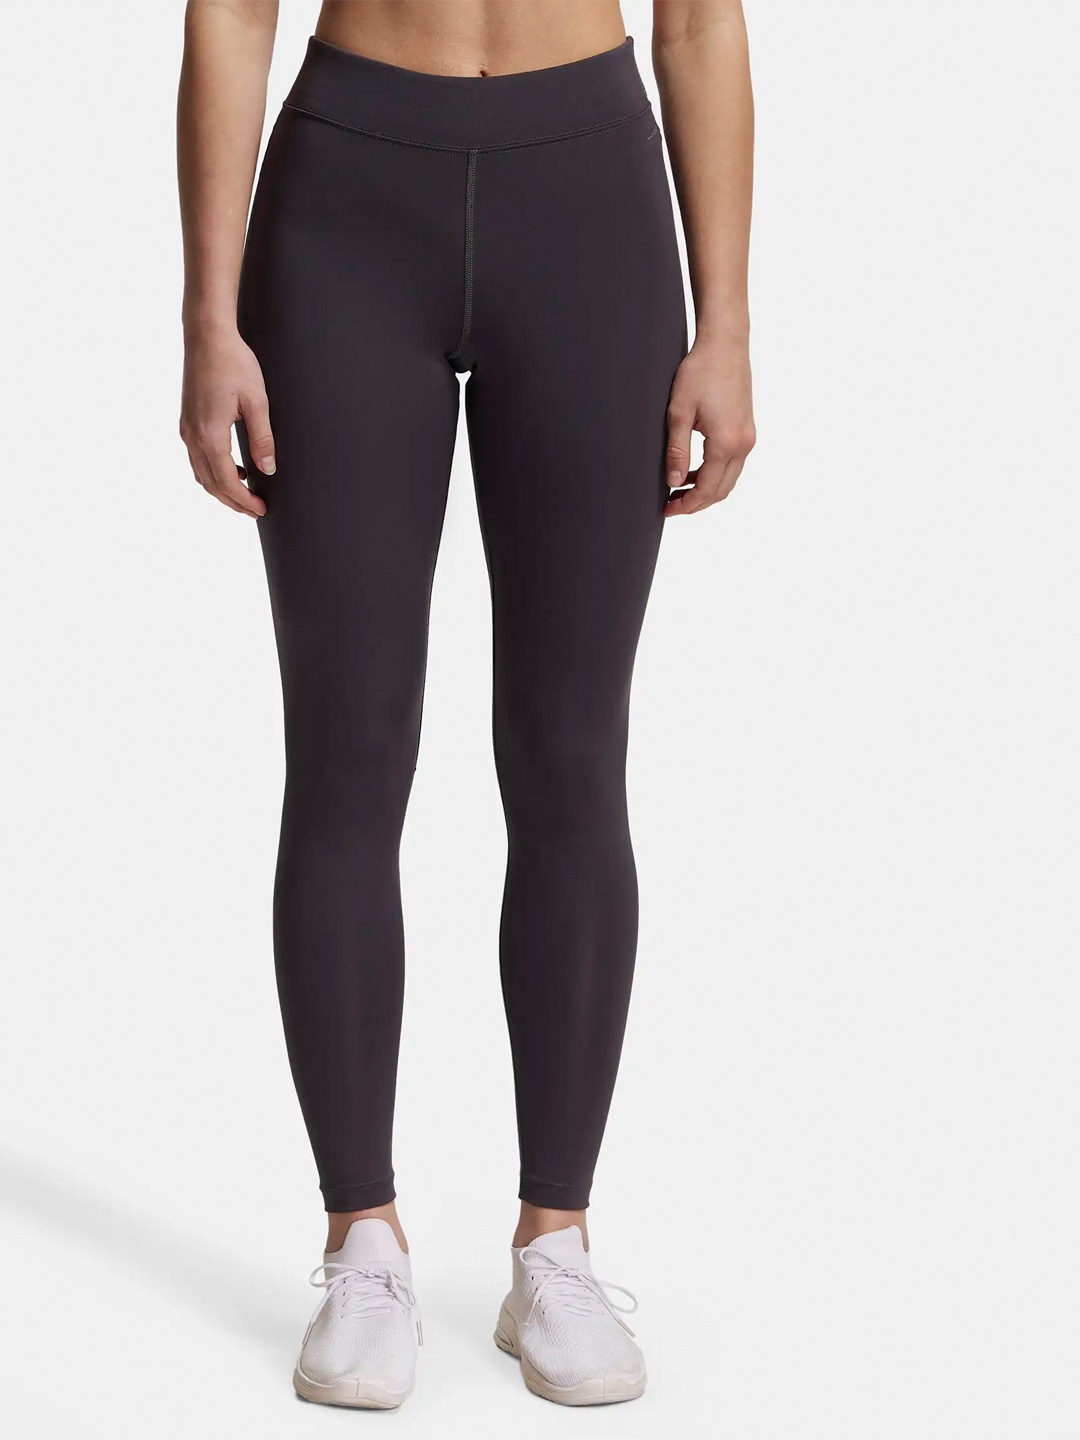 

Jockey Performance Leggings with Broad Waistband and Stay Dry Technology, Charcoal